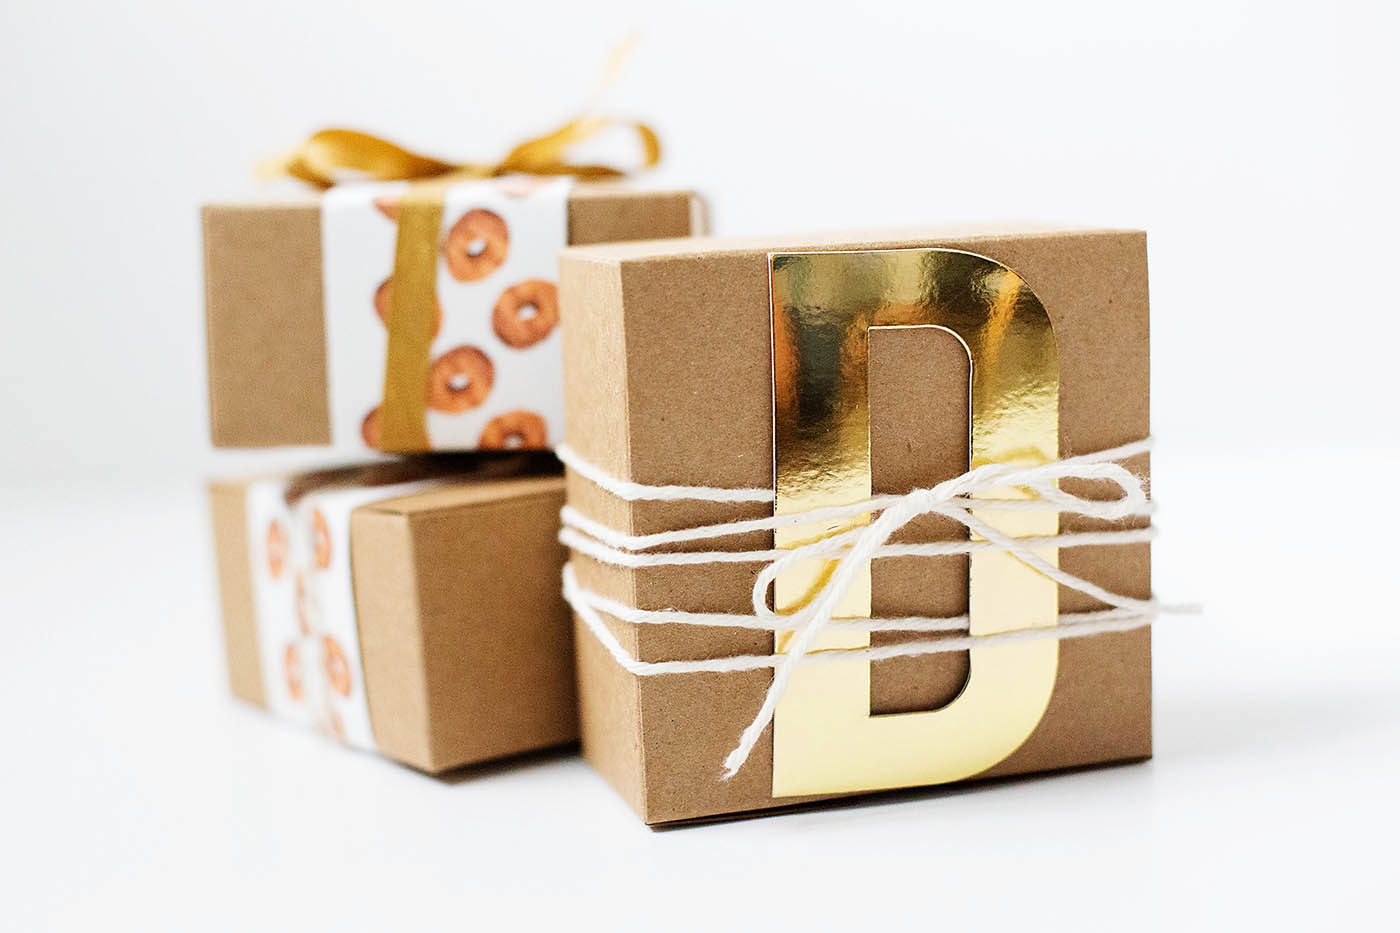 Free printable donut wrapping - perfect for a fun teacher or friend gift!